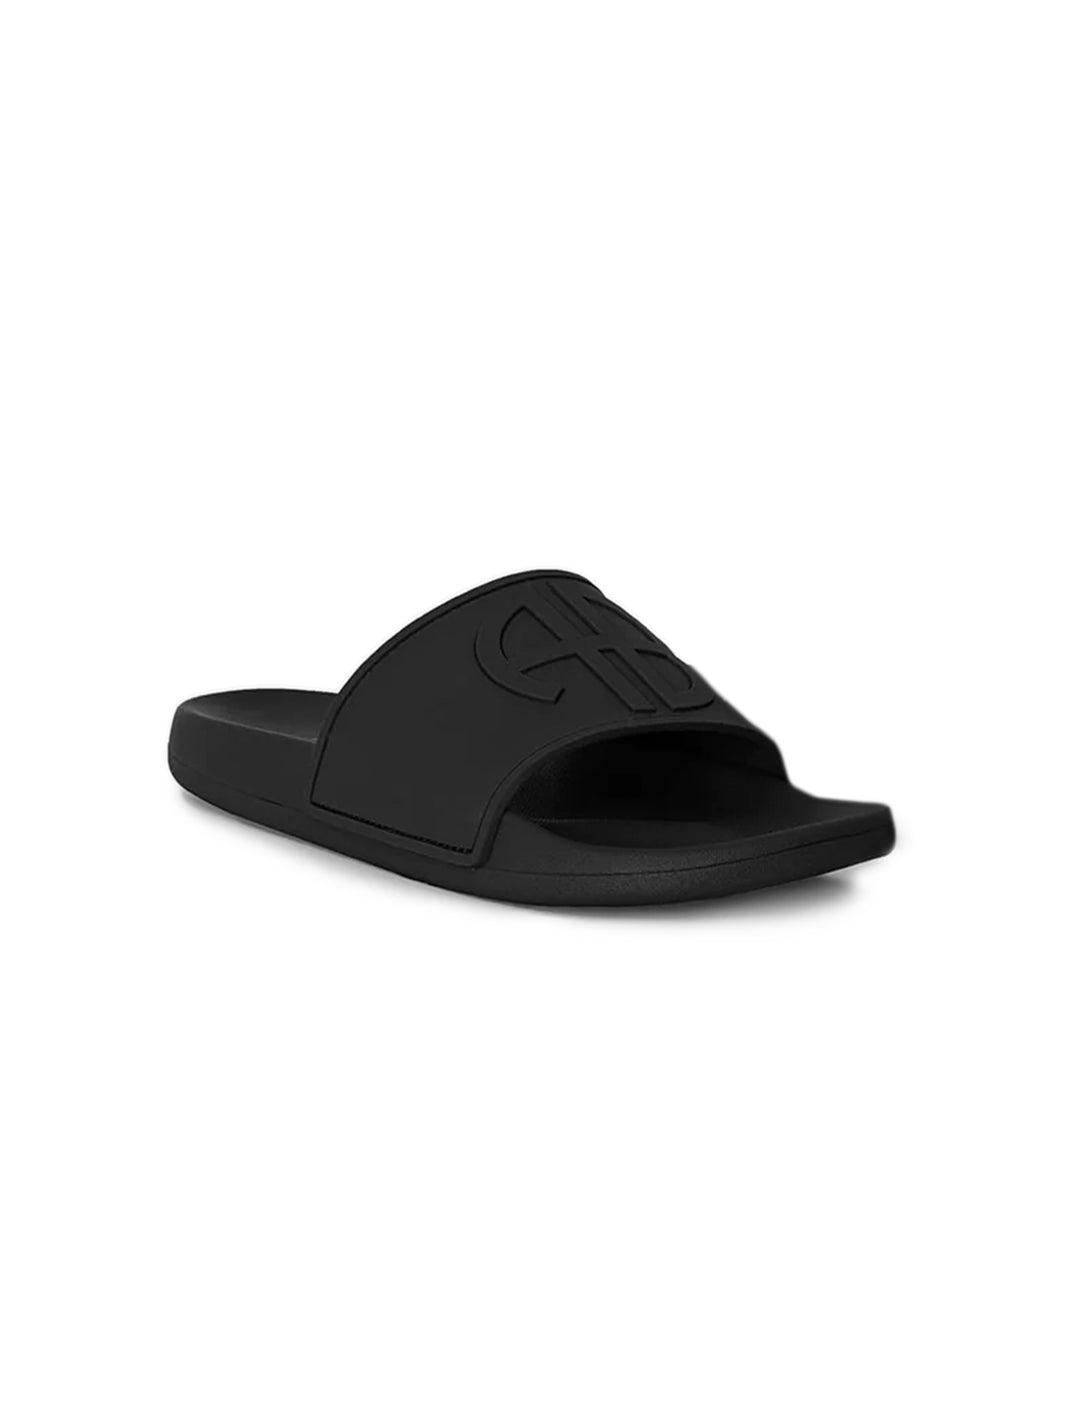 Front angle view of Anine Bing's isla slides in black.